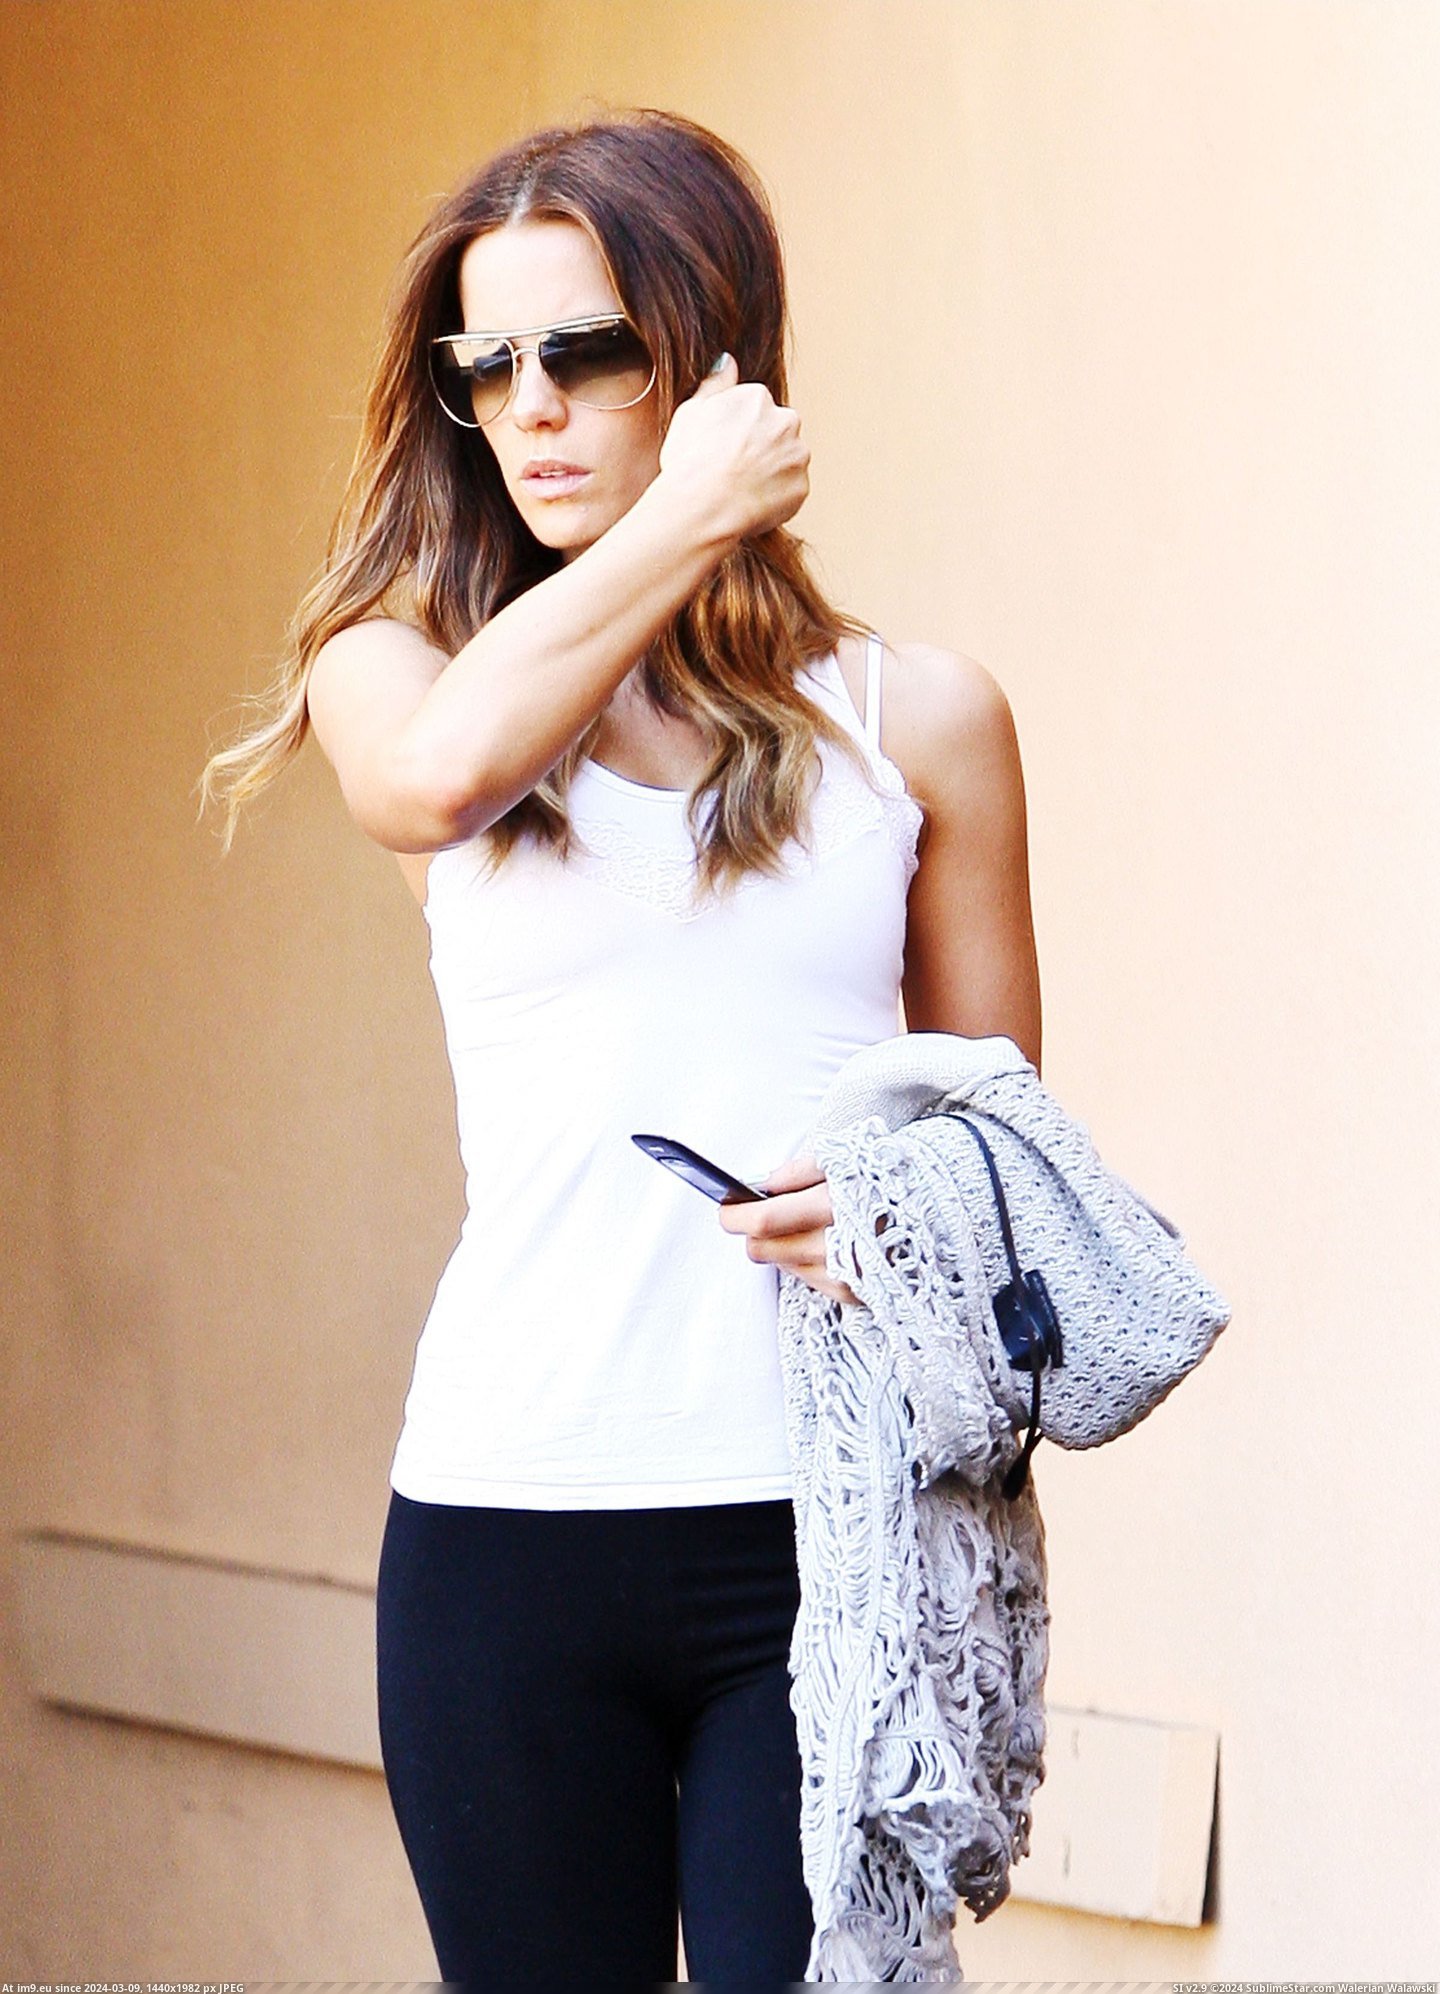  #Kate4  40104 3 Kate4 Pic. (Bild von album Kate Beckinsdale Picture Collection))